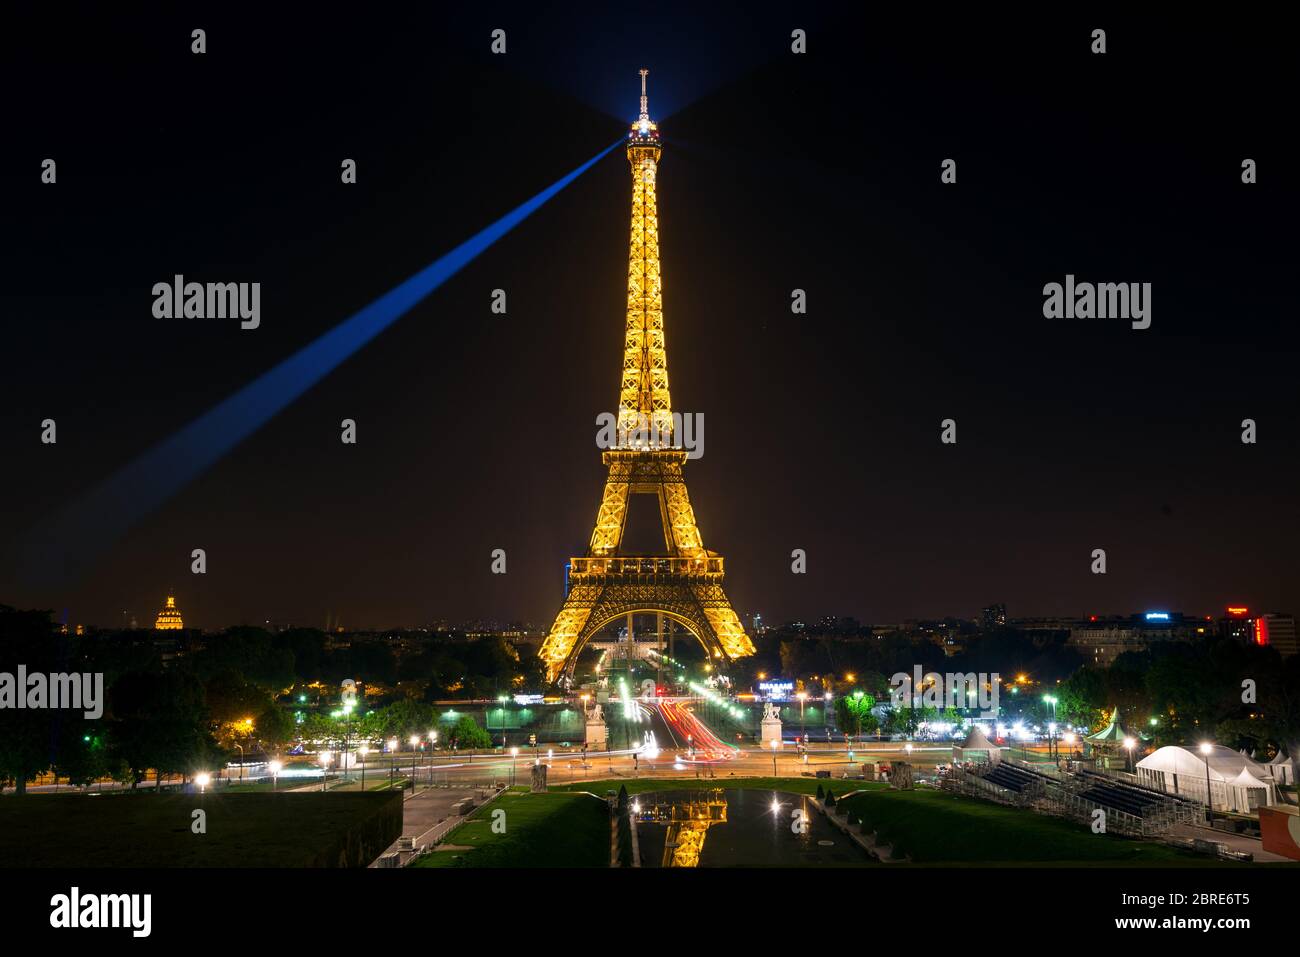 PARIS - SEPTEMBER 24: Lighting of the Eiffel tower at night on september 24, 2013 in Paris. The Eiffel tower is one of the major tourist attractions o Stock Photo